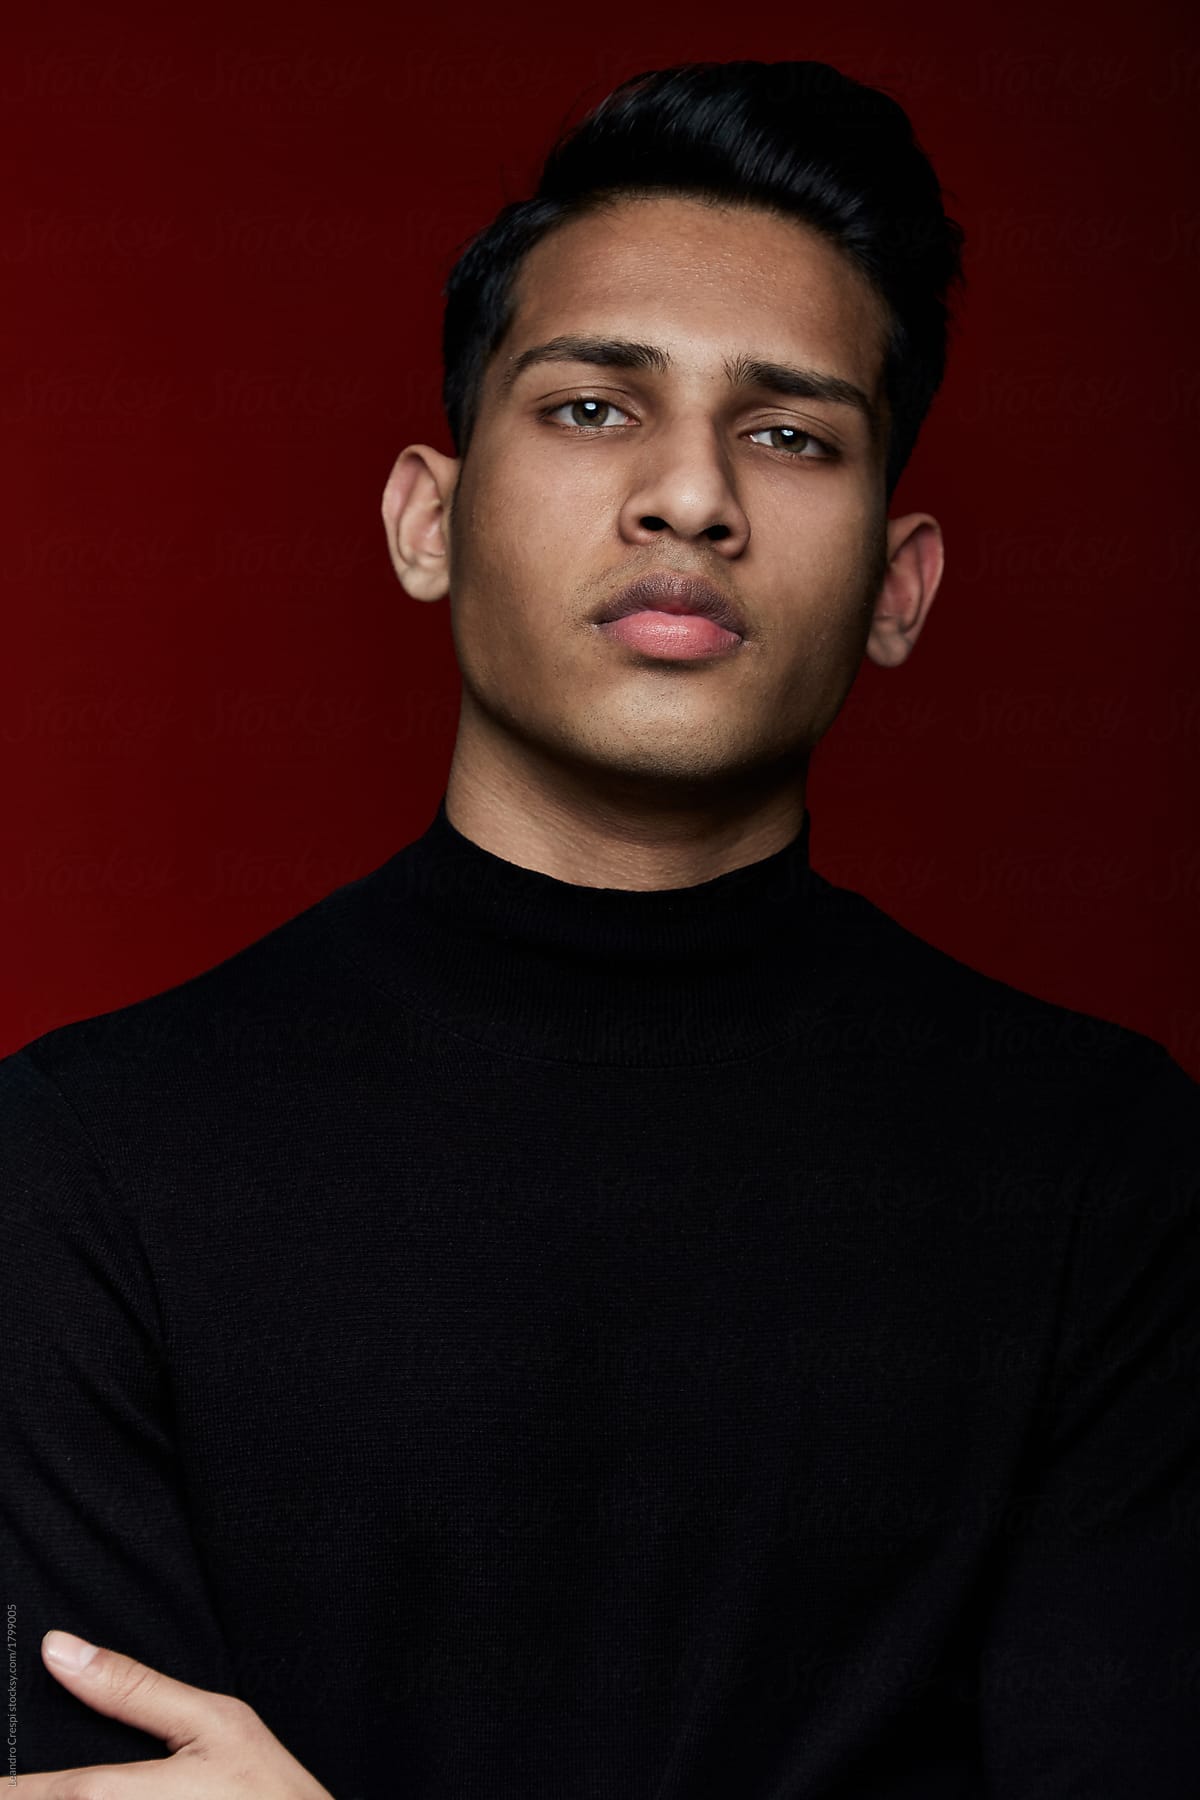 Handsome Indian guy portrait over red background